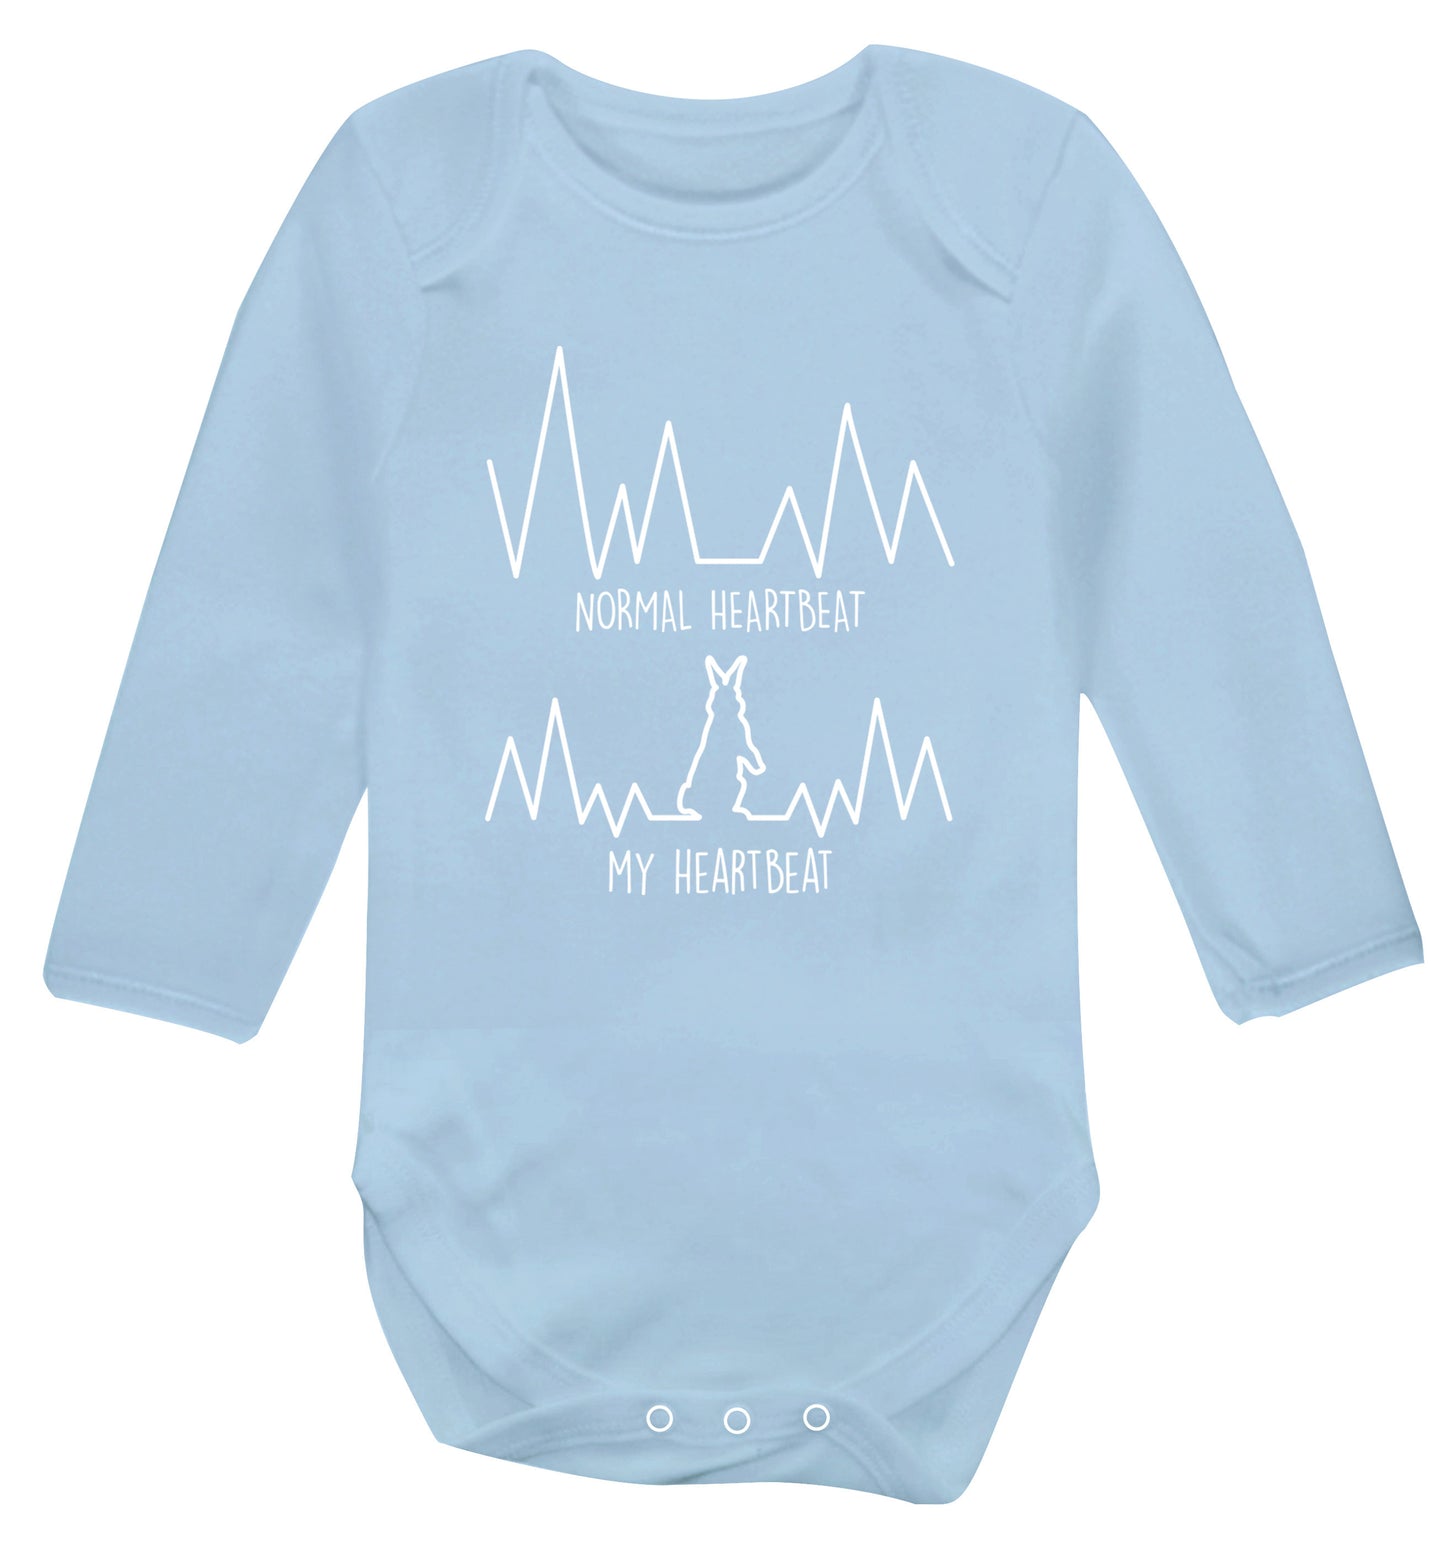 Normal heartbeat, my heartbeat rabbit lover Baby Vest long sleeved pale blue 6-12 months